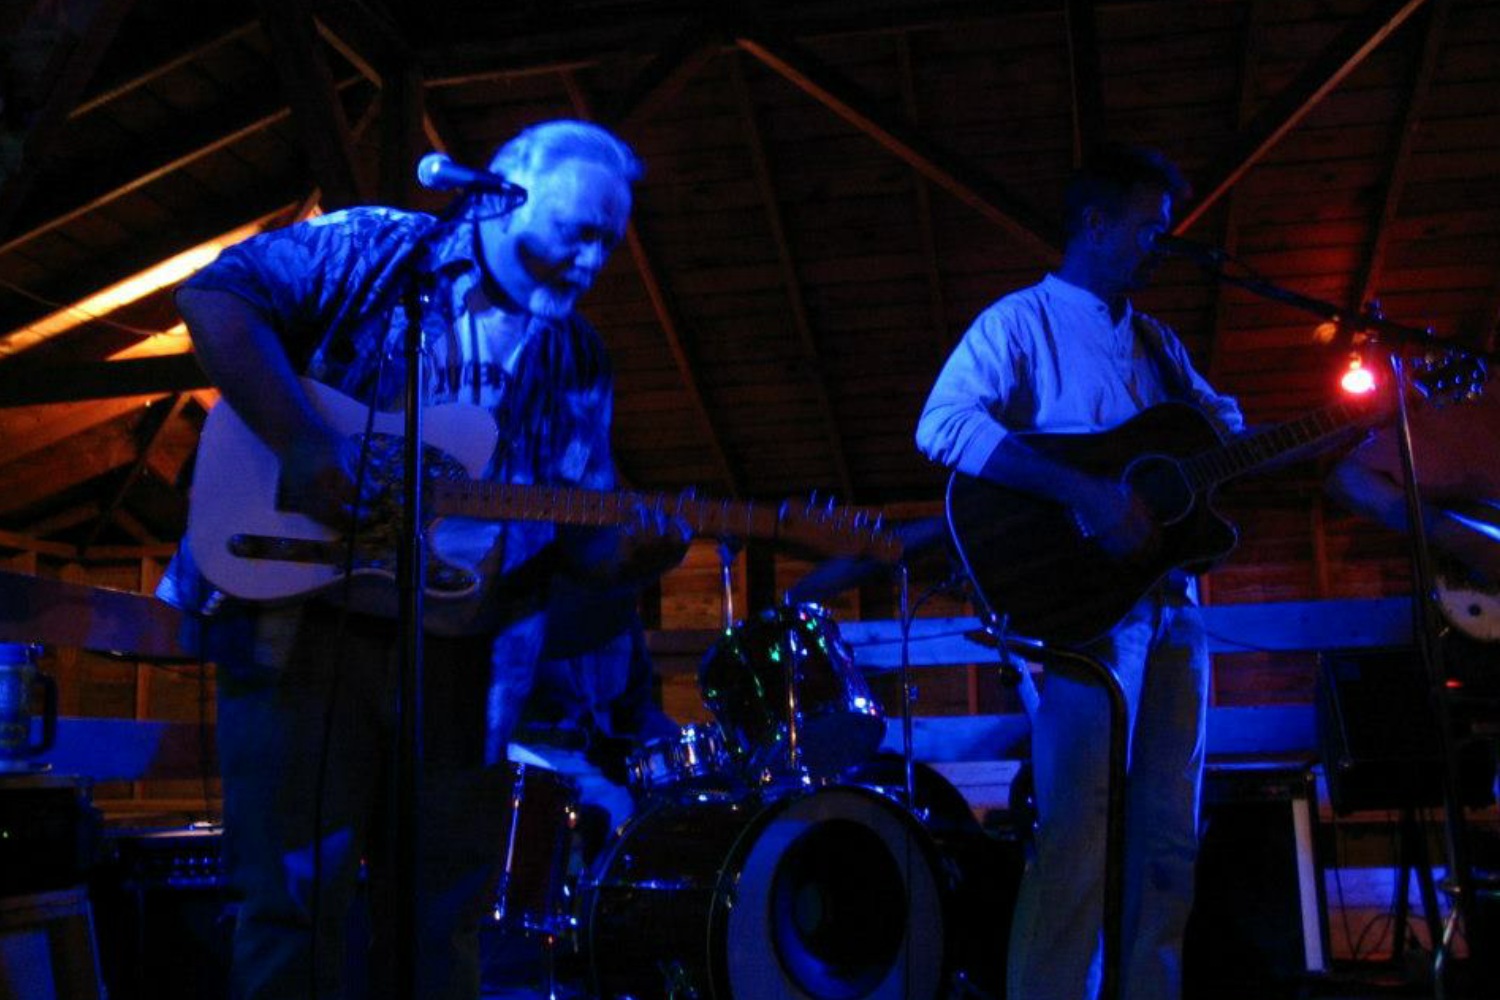 Live Music featuring The Lonesome Walker Band at  
						Norden Dance Hall in Springview/Norden, Nebraska - 
						Northeast Nebraska Musicians The Lonesome Walker Band  
						performing live  
						at Norden Dance Hall in Springview/Norden, Nebraska
						on Saturday, September 24, 2016.